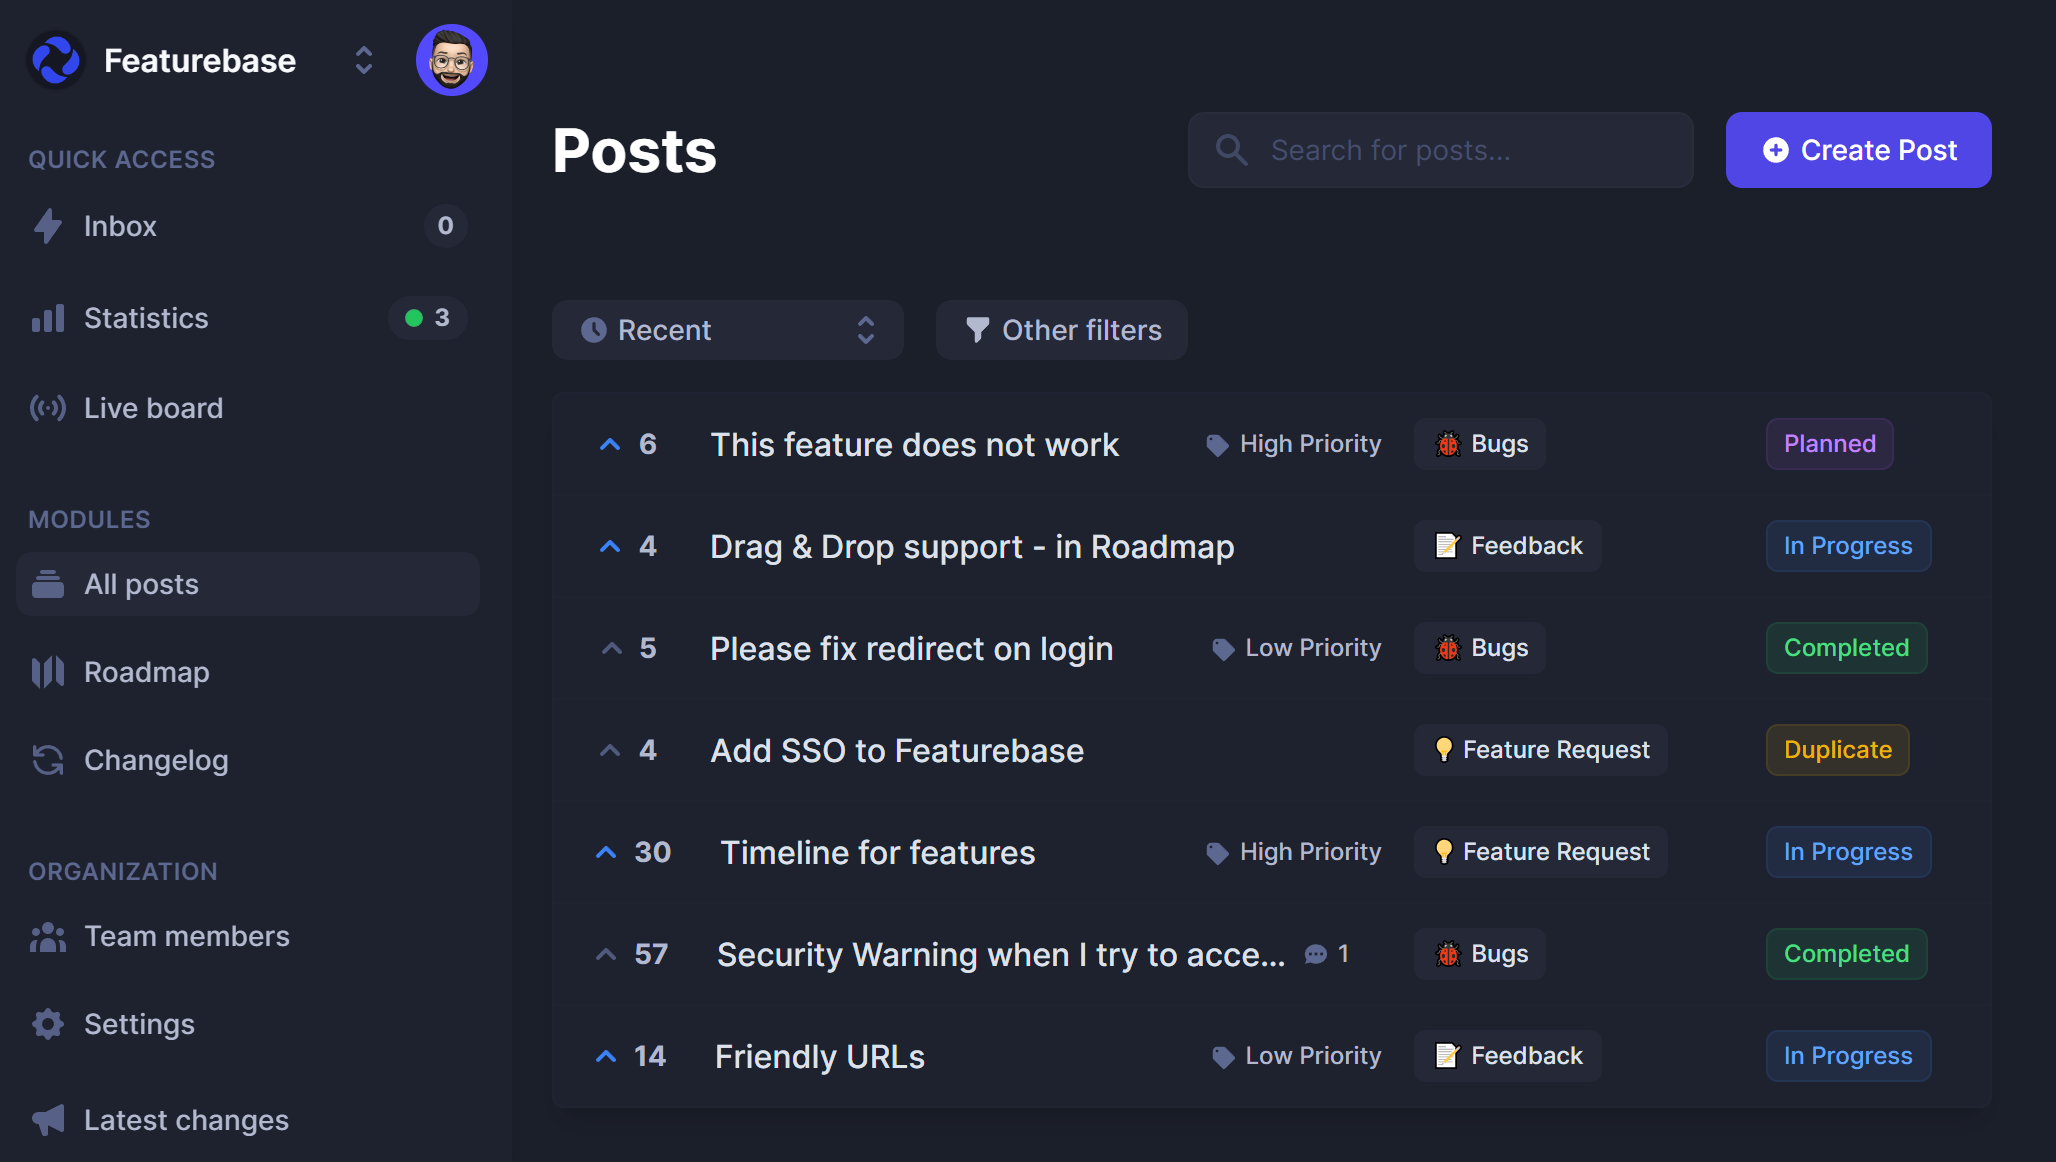 Featurebase dashboard with a list of posts made by users sorted in recent order.